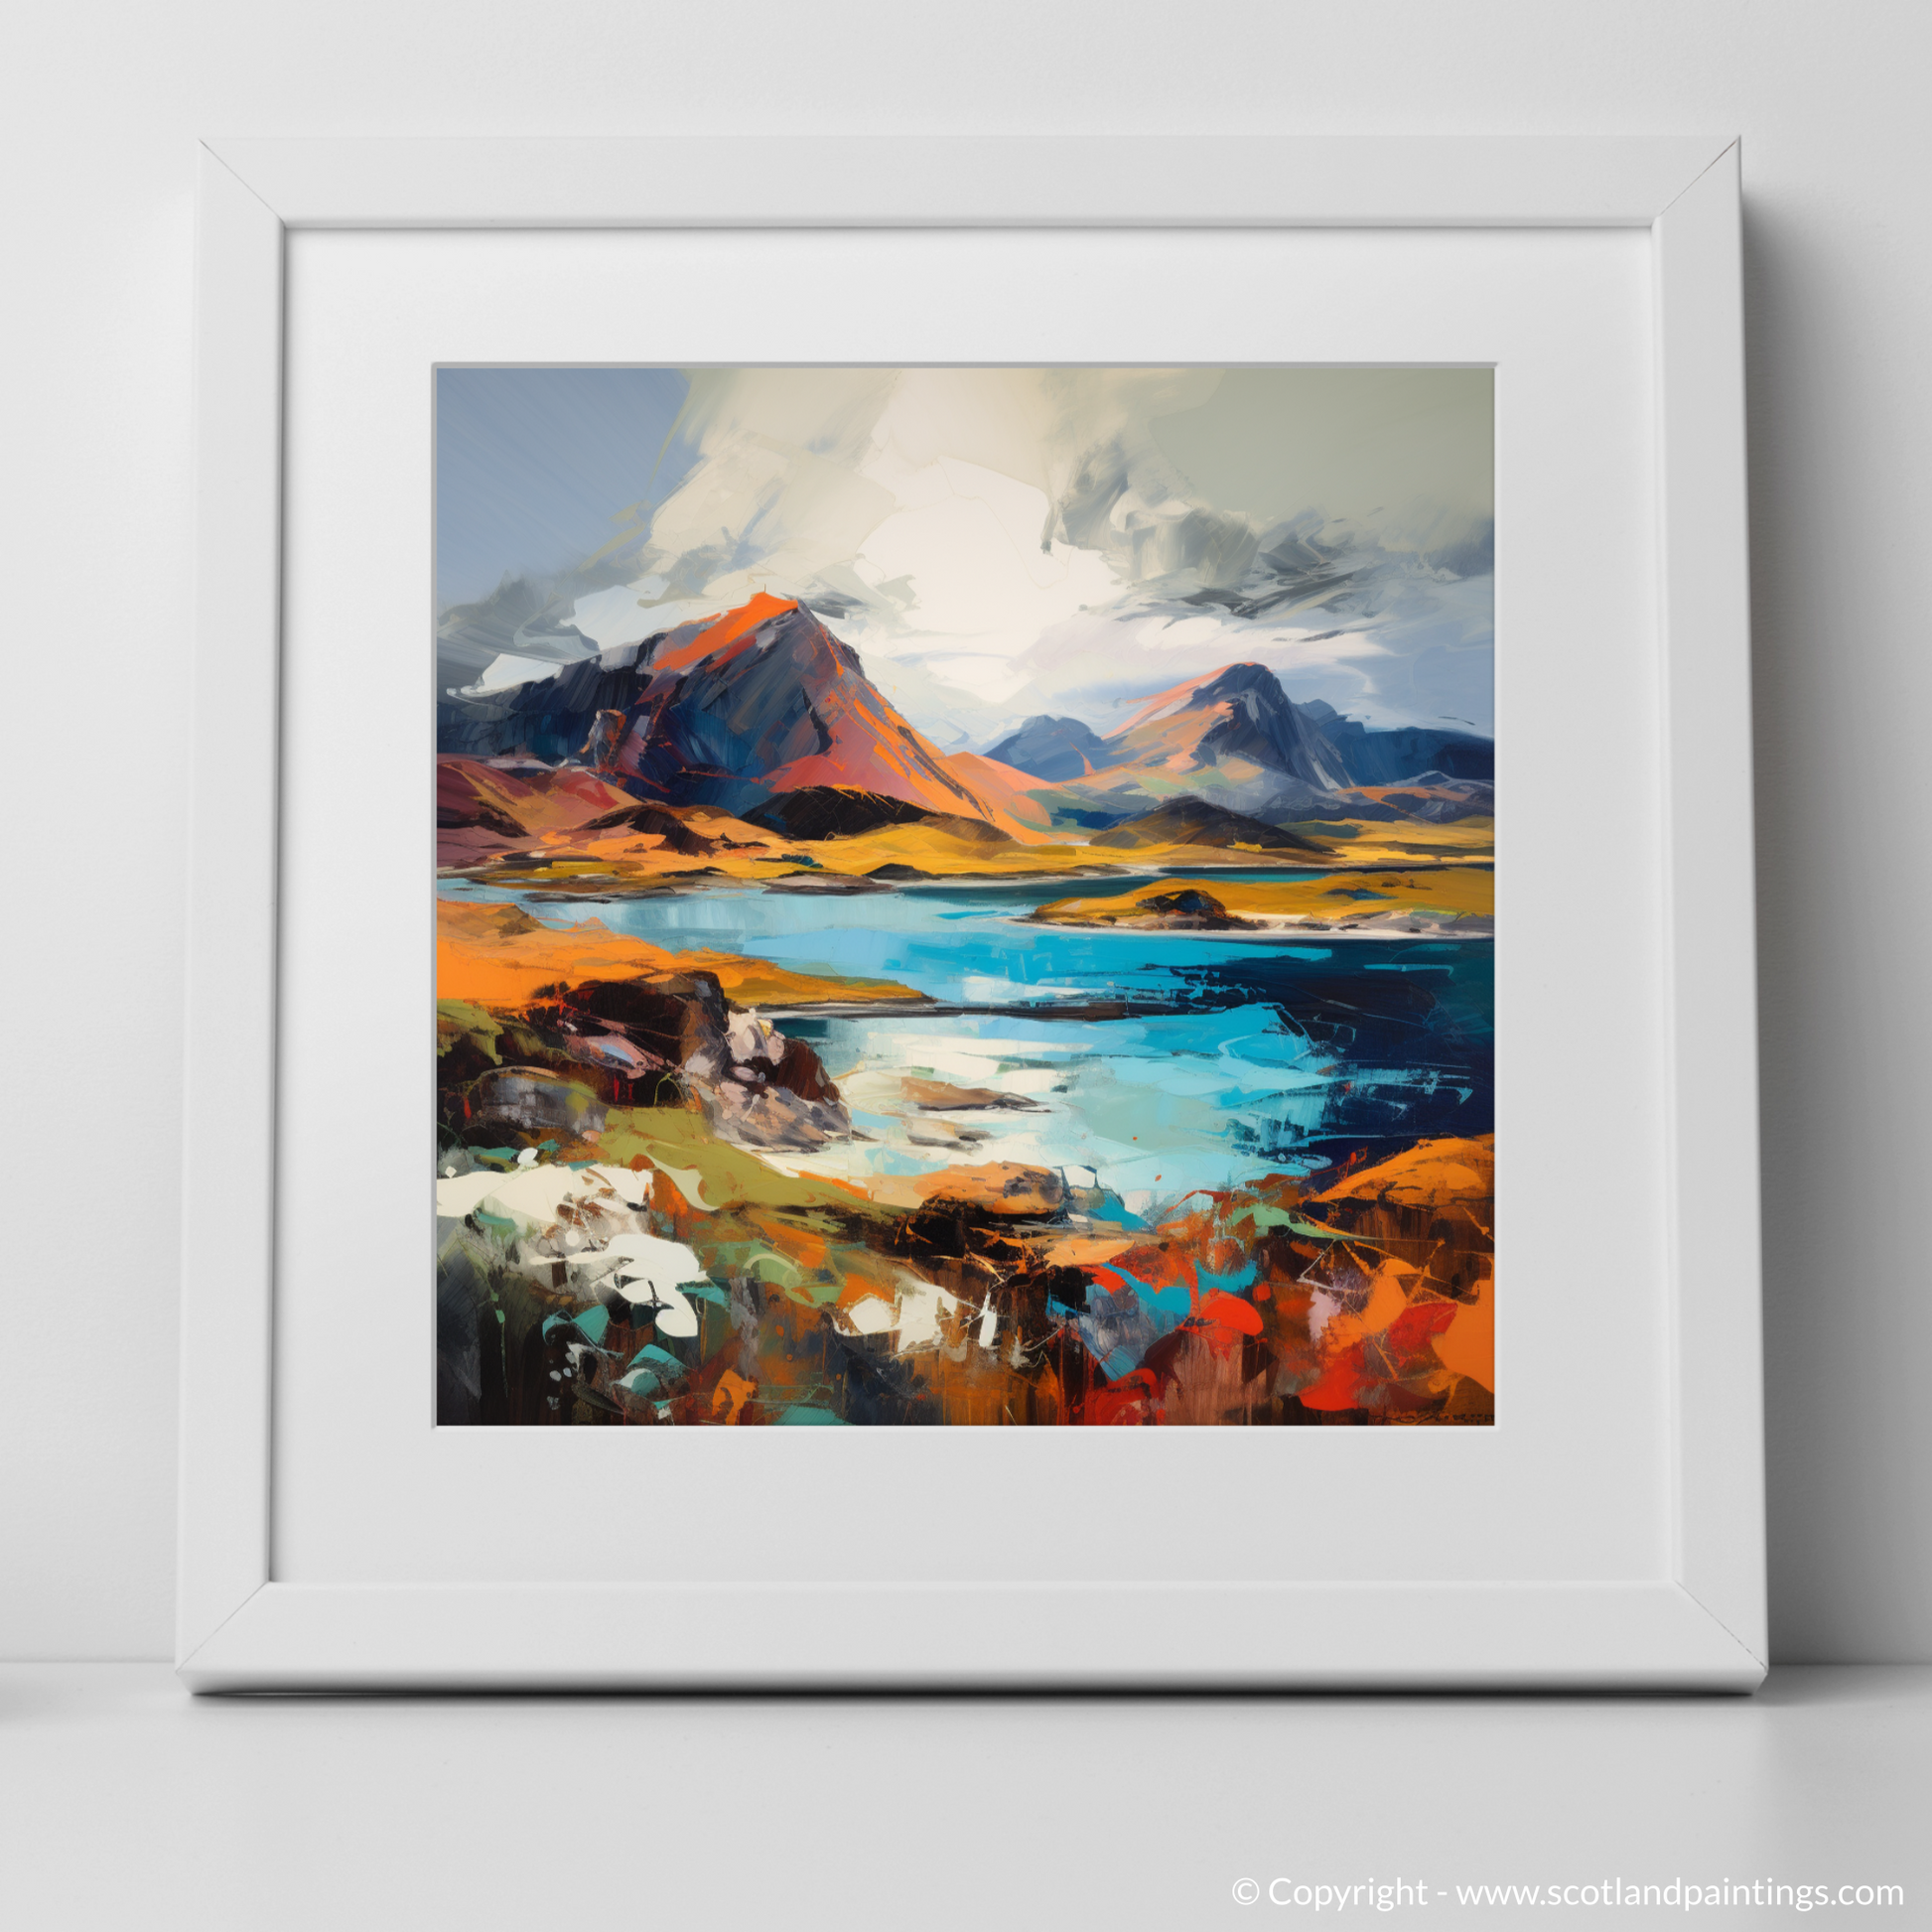 Art Print of Isle of Rum, Inner Hebrides with a white frame